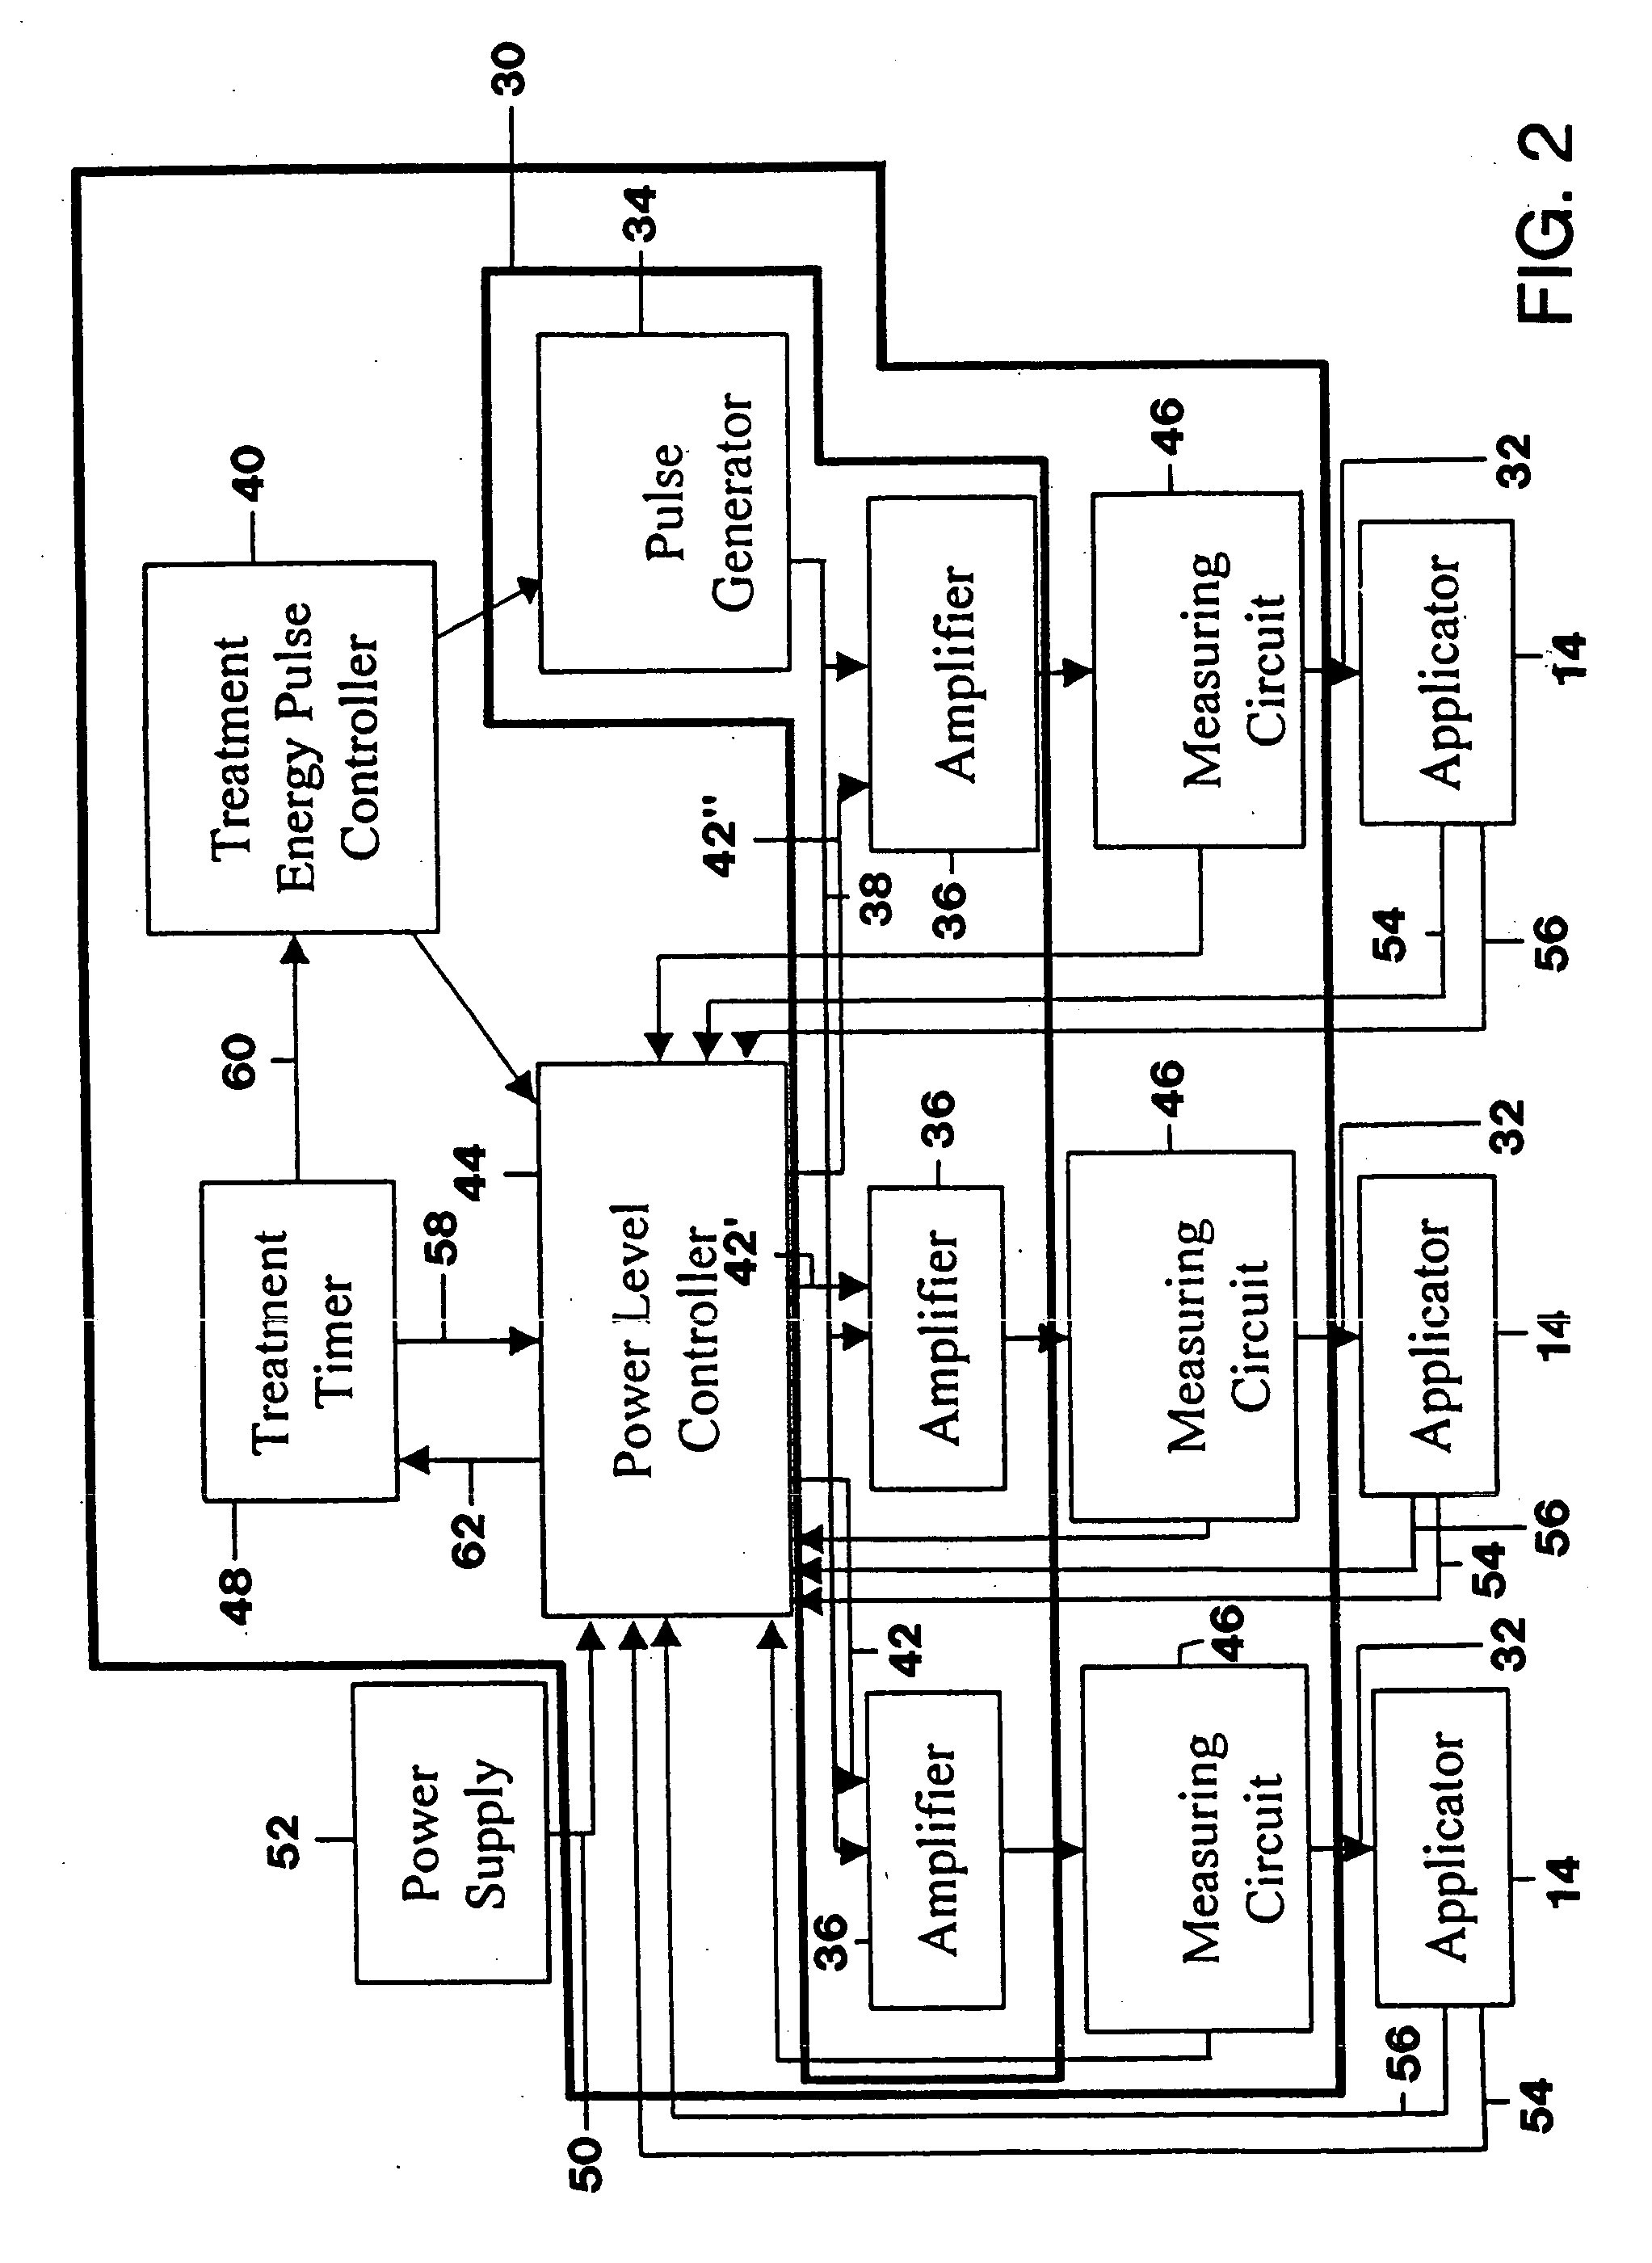 Pulsed electromagnetic energy treatment apparatus and method